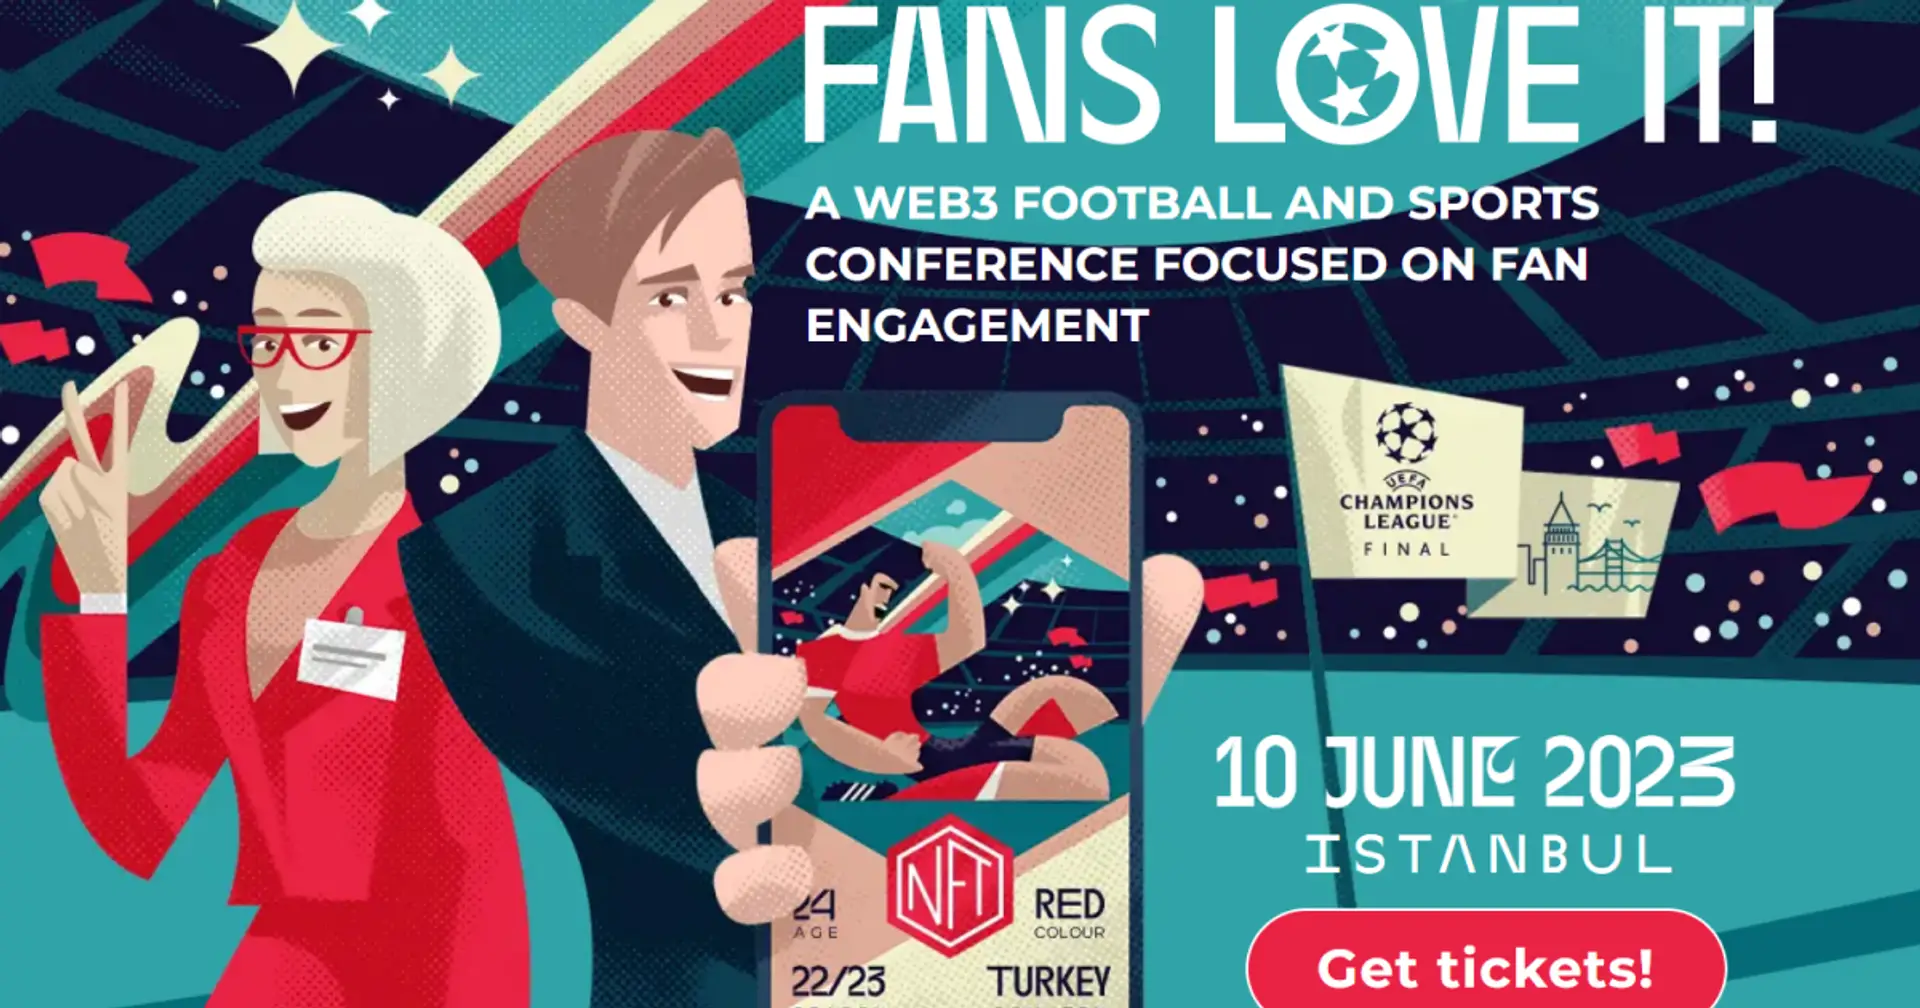 Learn all the latest about fan engagement at FansLoveIt! conference set to take place before Champions League final — get your ticket